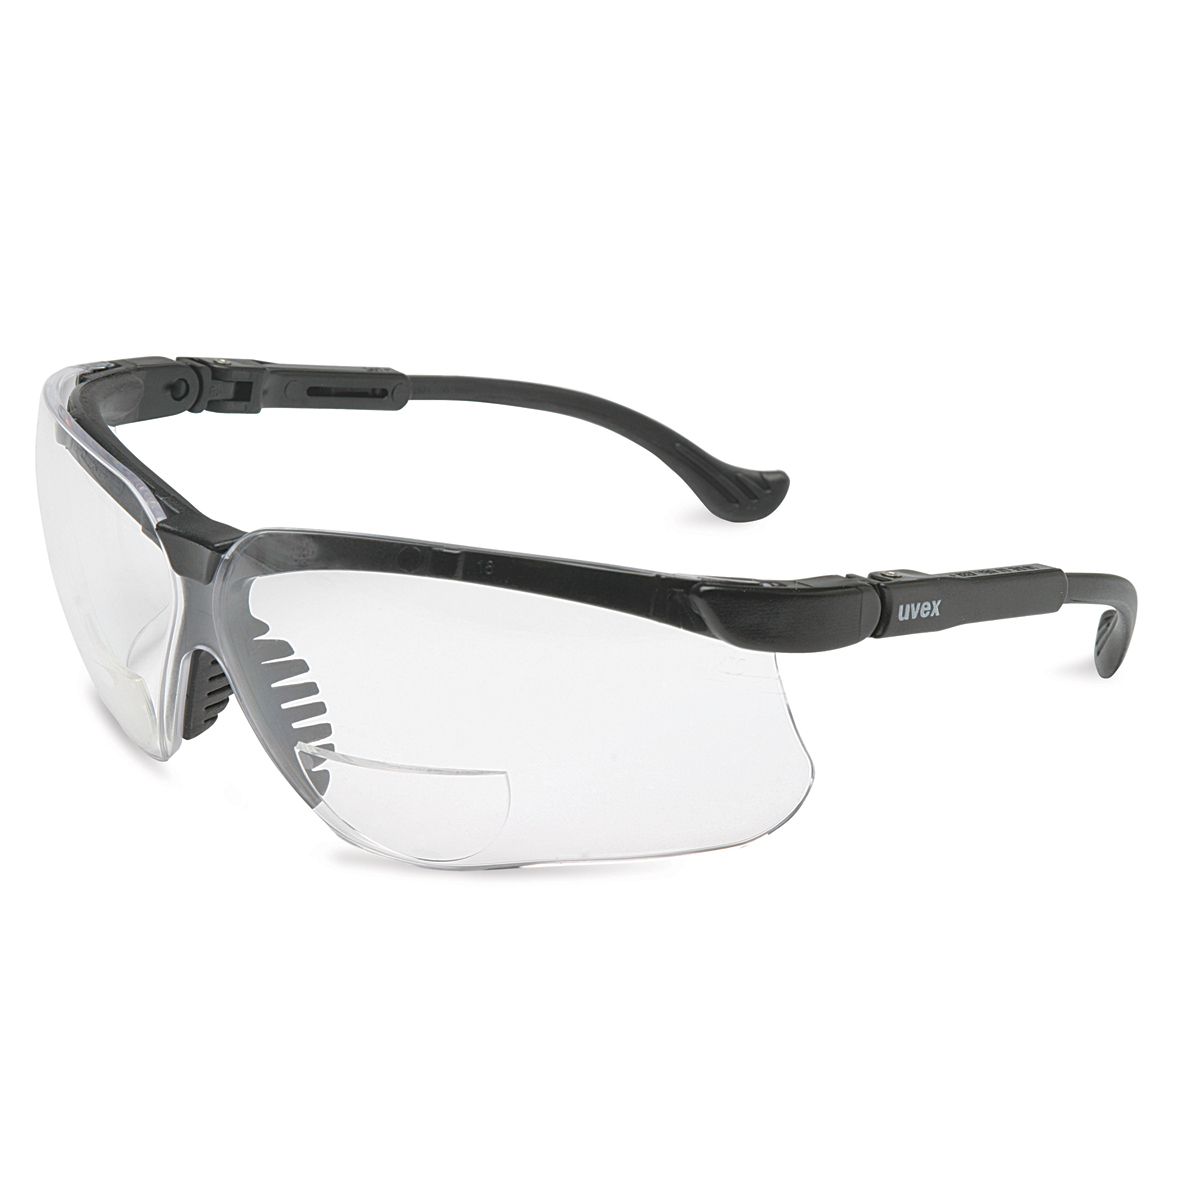 Honeywell Uvex Genesis® 1 Diopter Black Safety Glasses With Clear Anti-Scratch/Hard Coat Lens (Availability restrictions apply.)